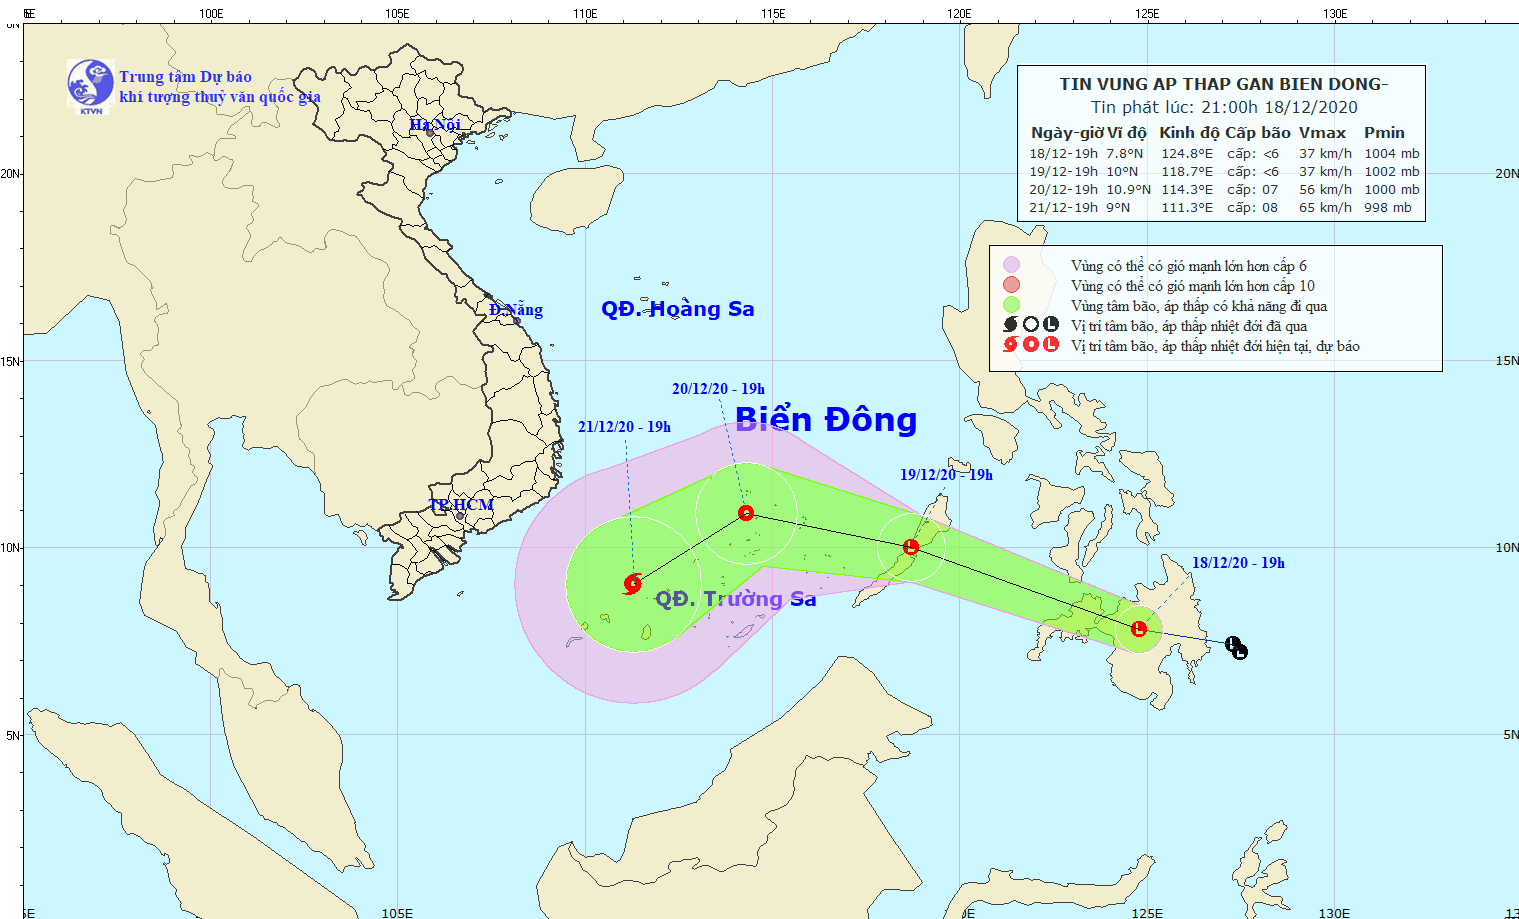 Path map of newly- formed low pressure zone